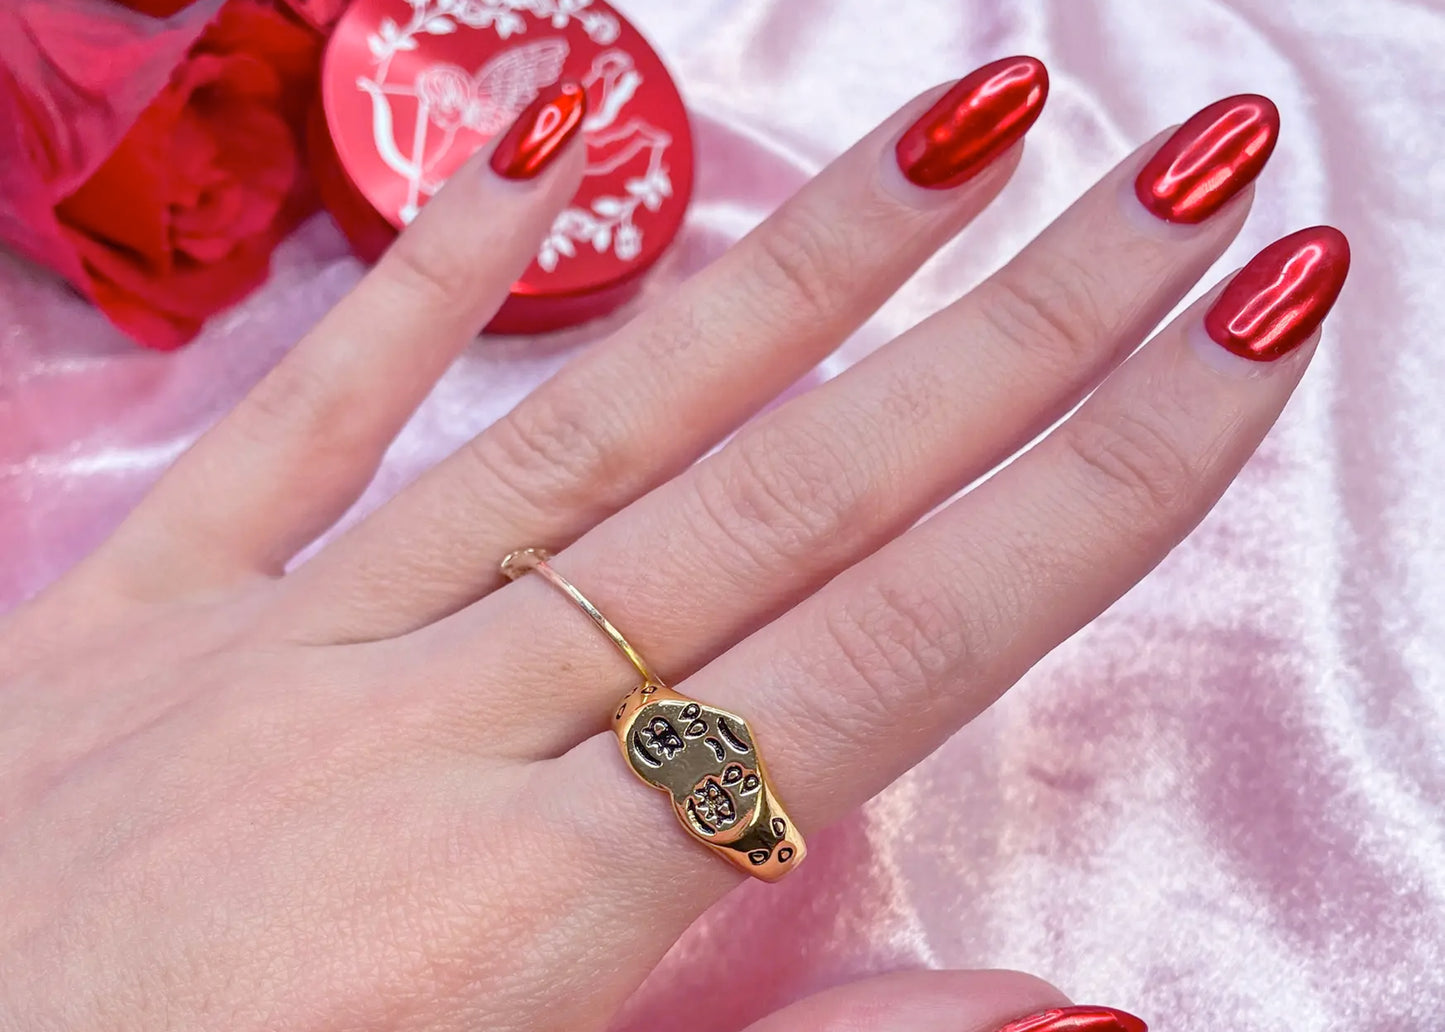 Crying Heart Ring in Gold